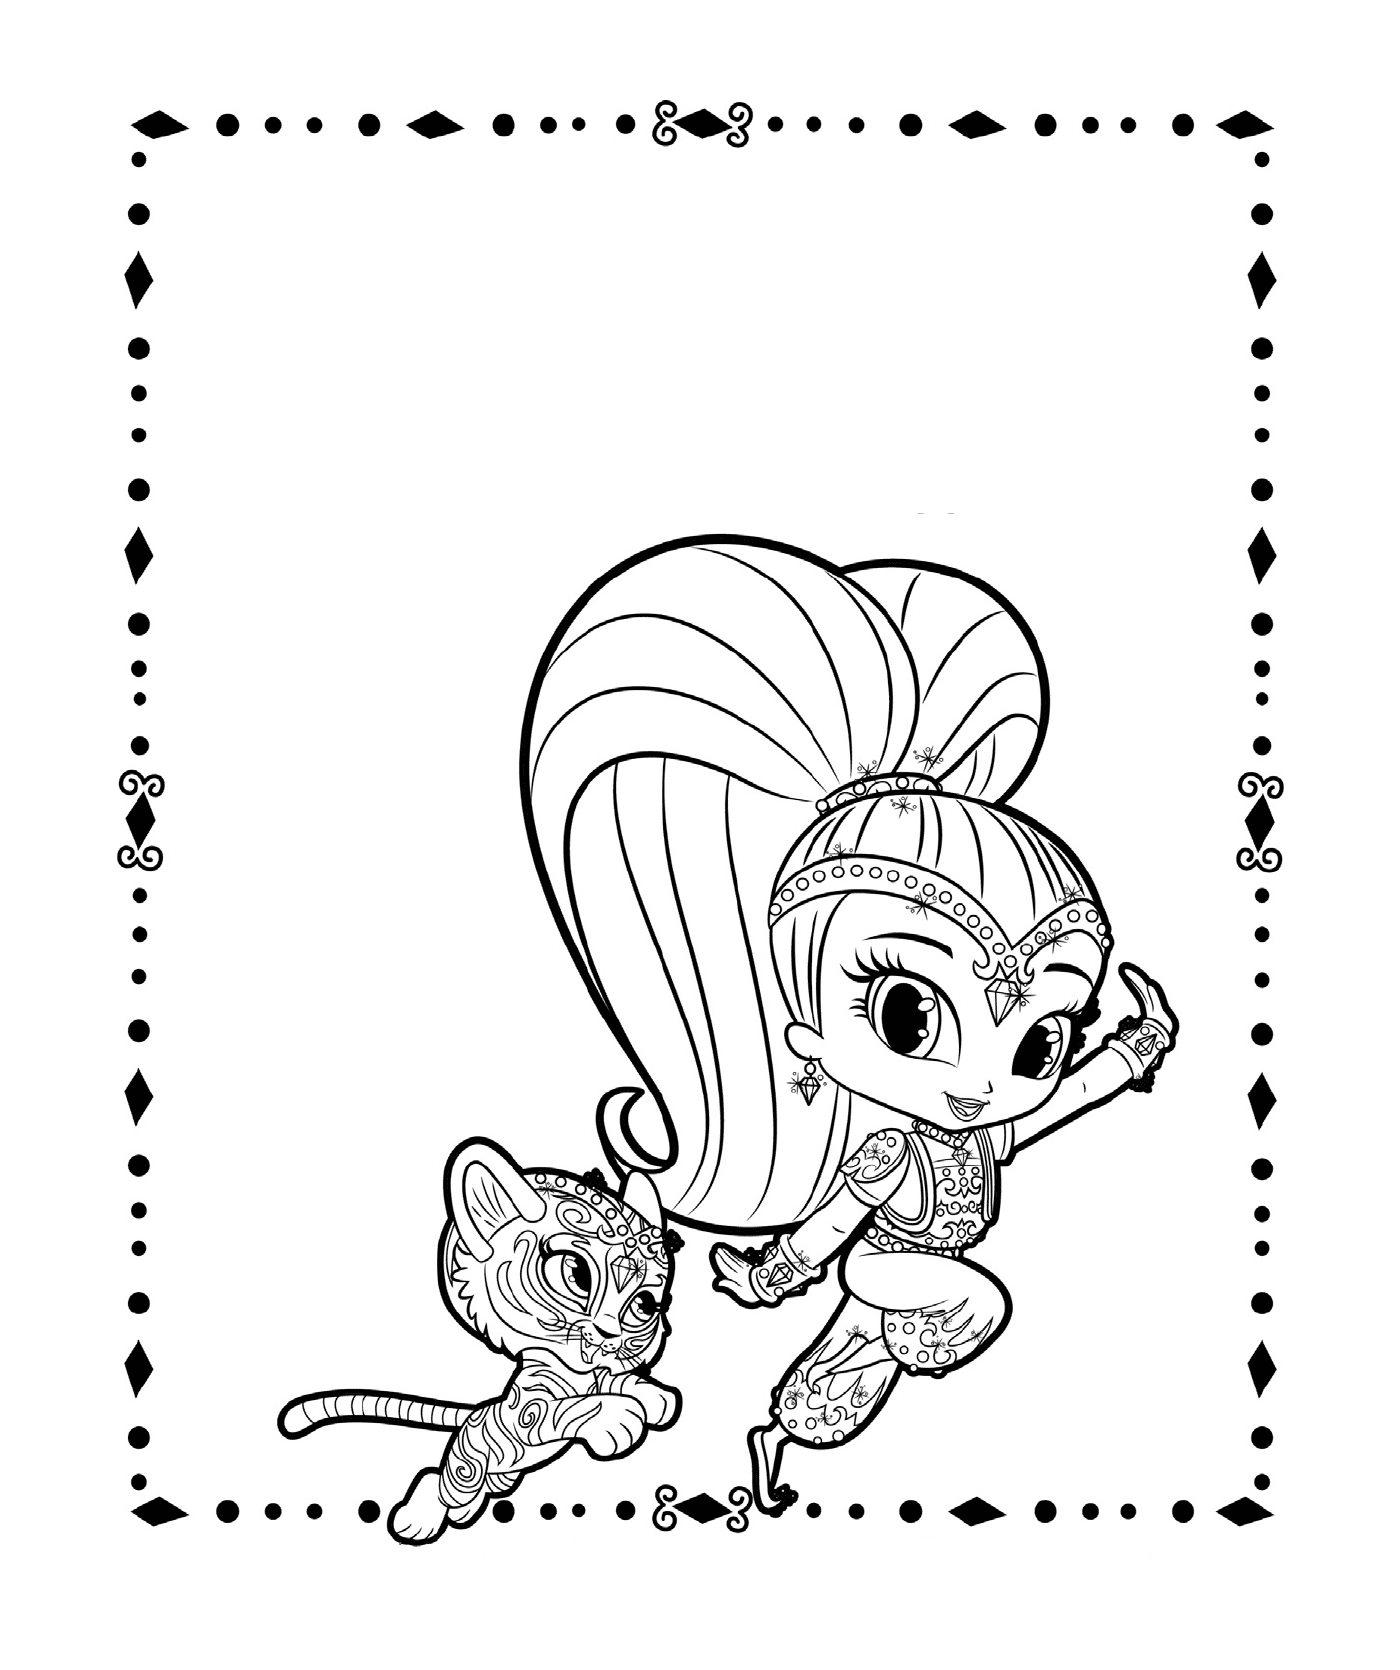 Shine and Tiger from shimmer et shine